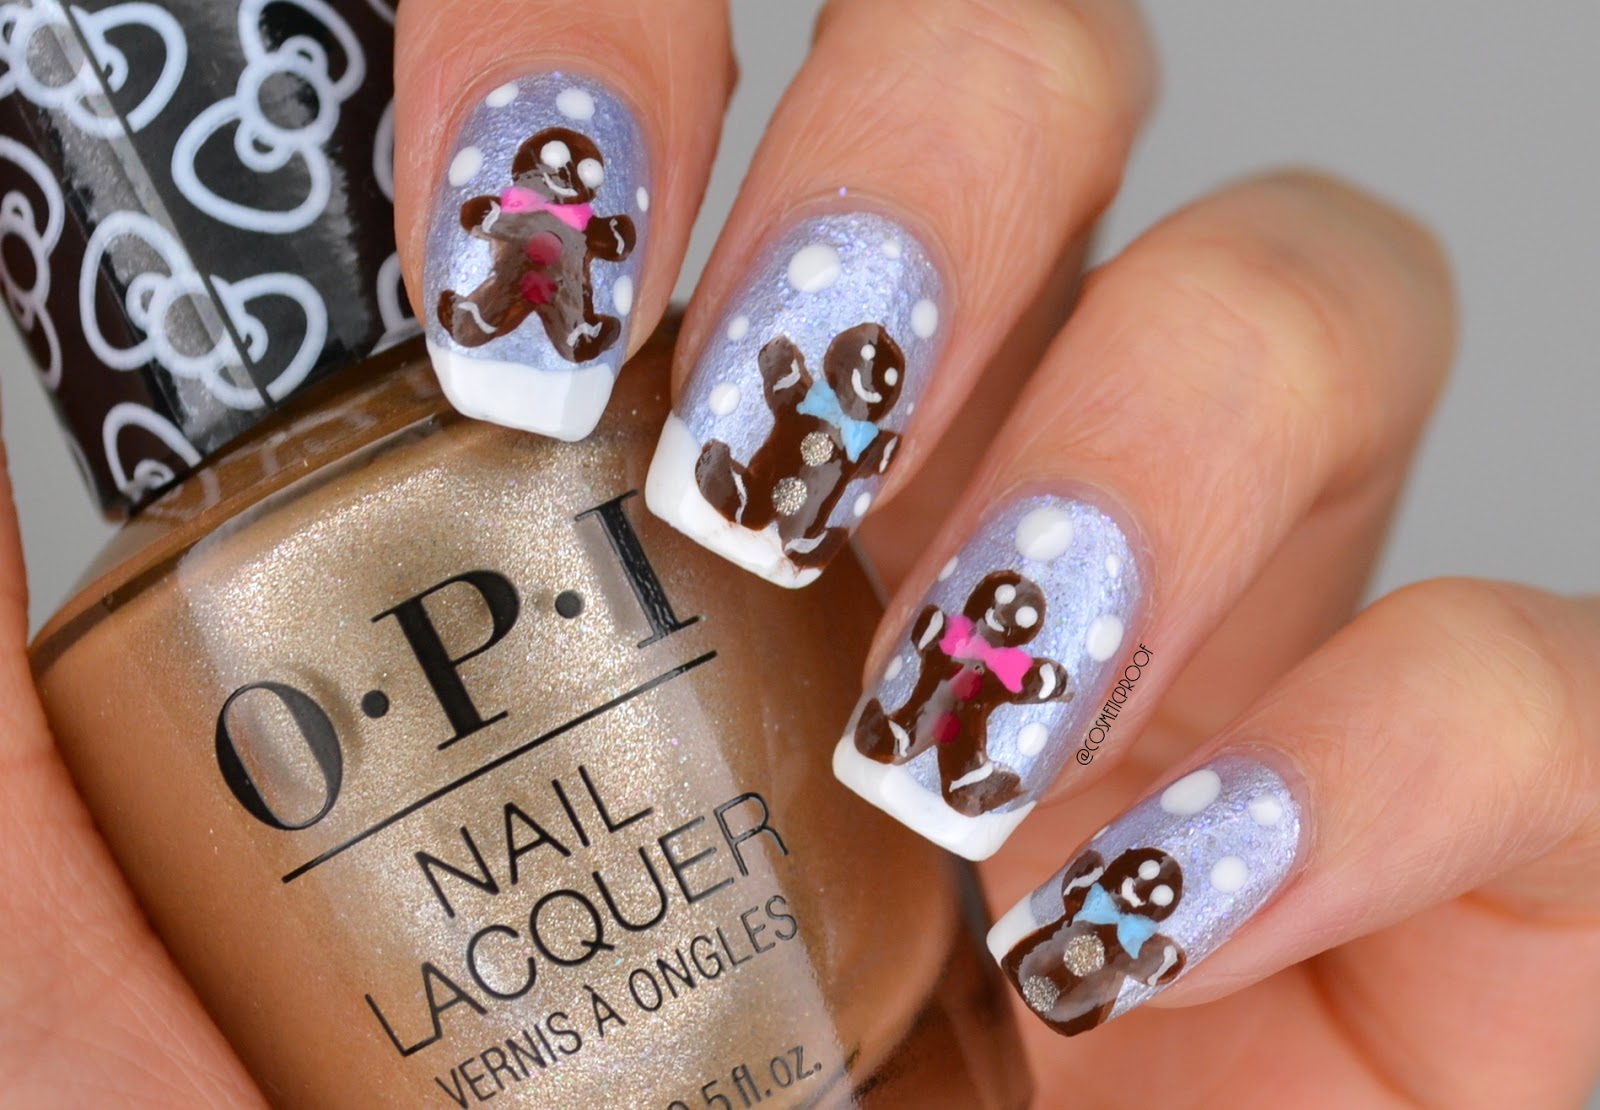 5. "Gingerbread Man Nails" - wide 4